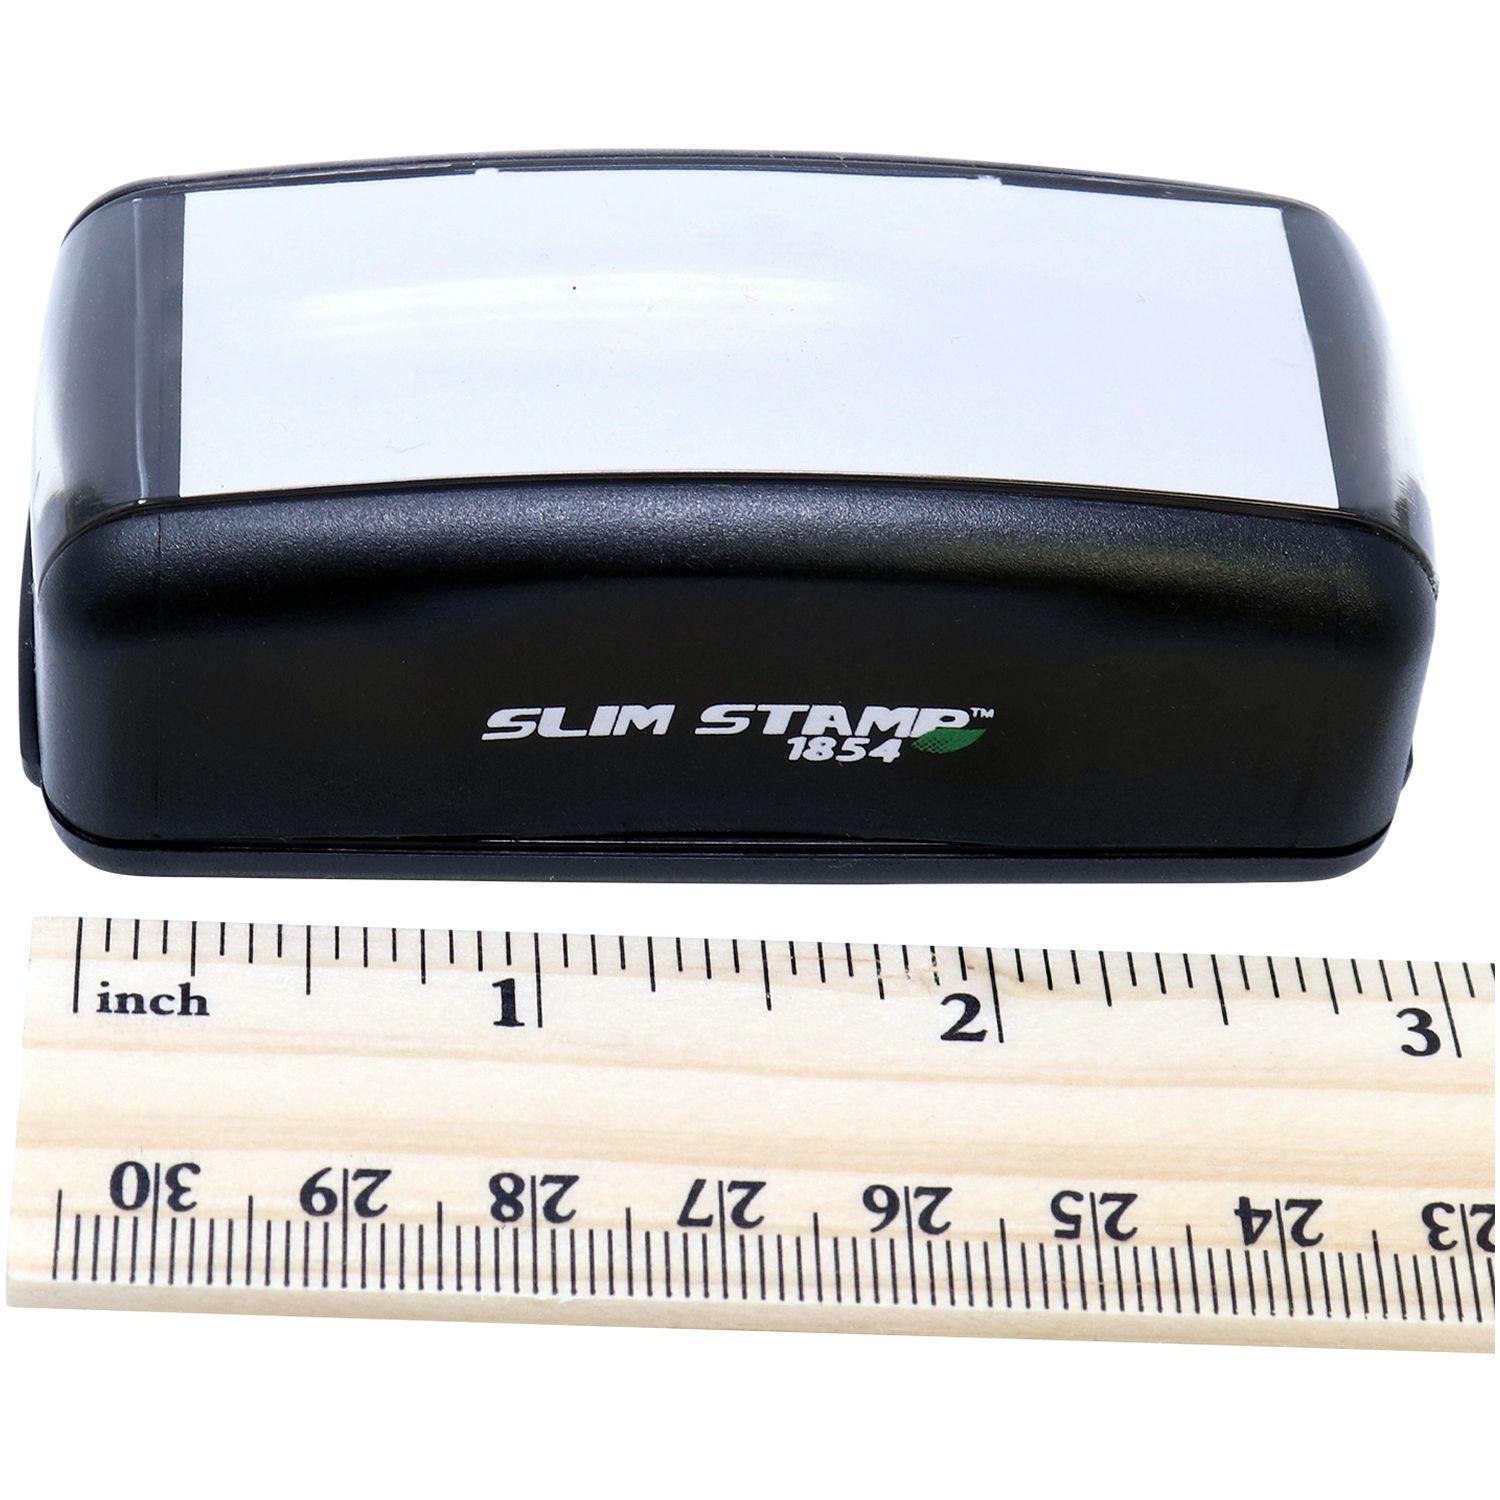 Measurement Large Pre-Inked Economy Mail Stamp with Ruler